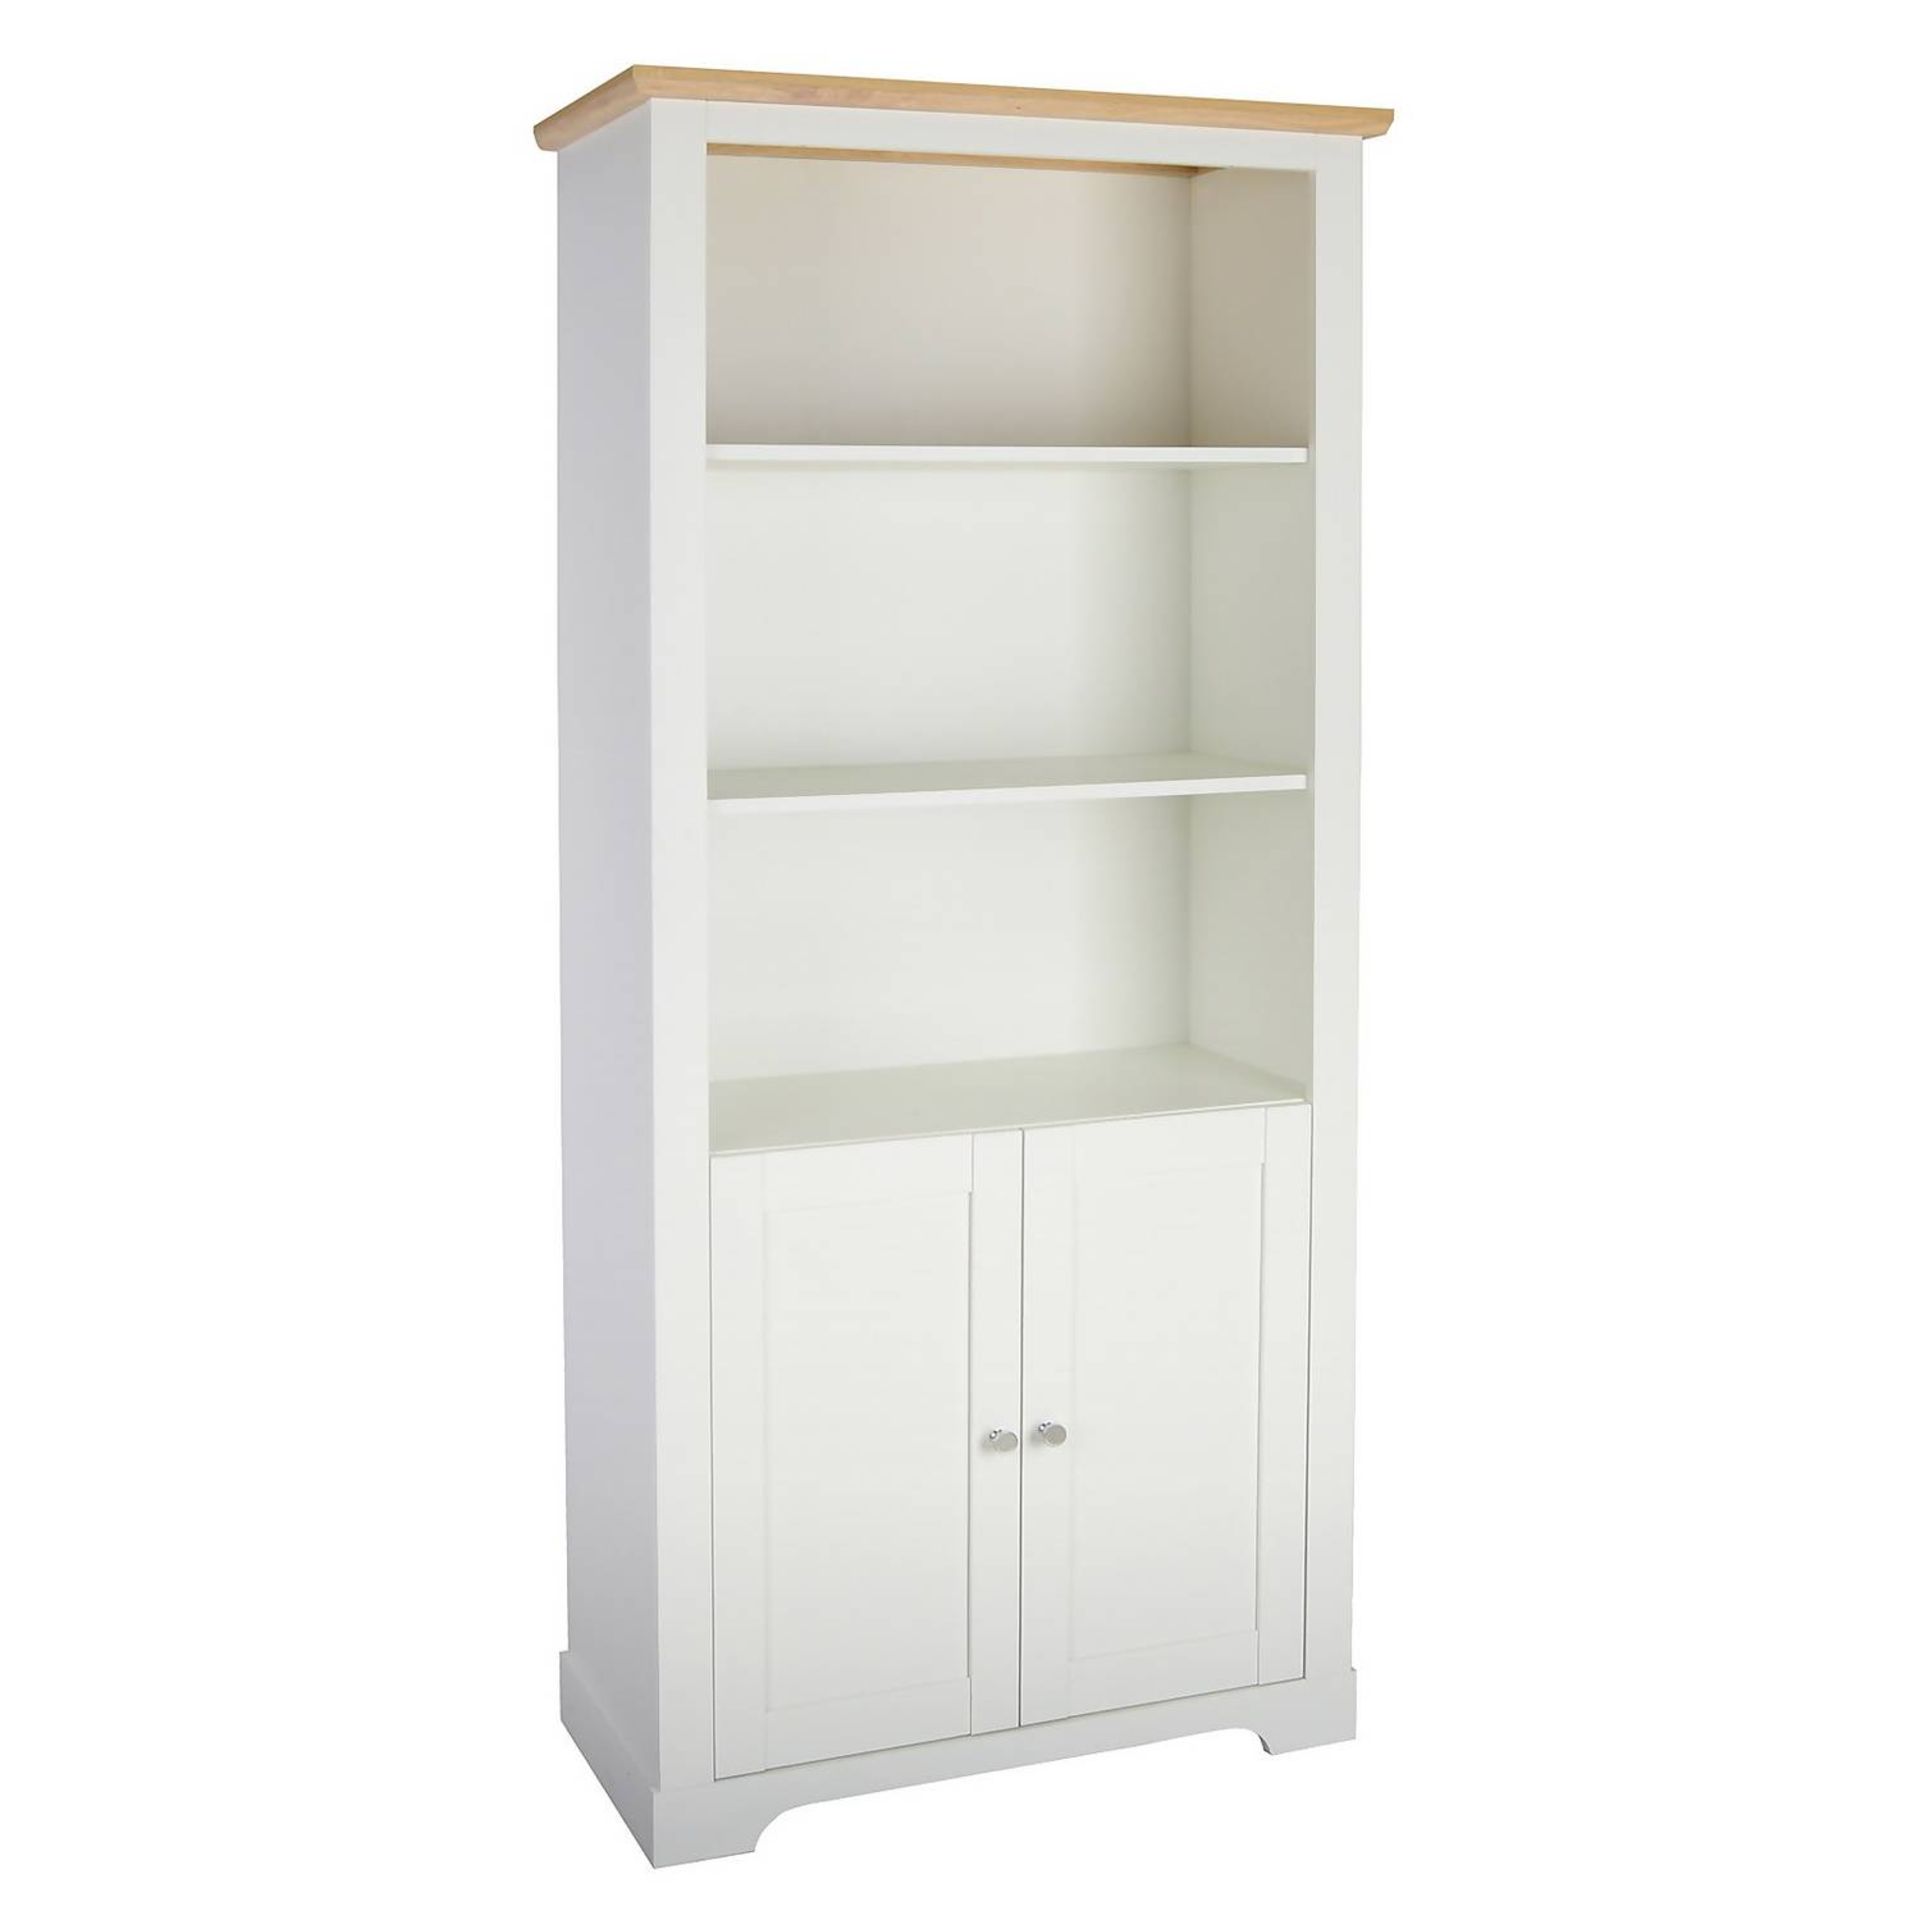 (P9) 1x Diva Bookcase Ivory RRP £150. (Packaging Open).